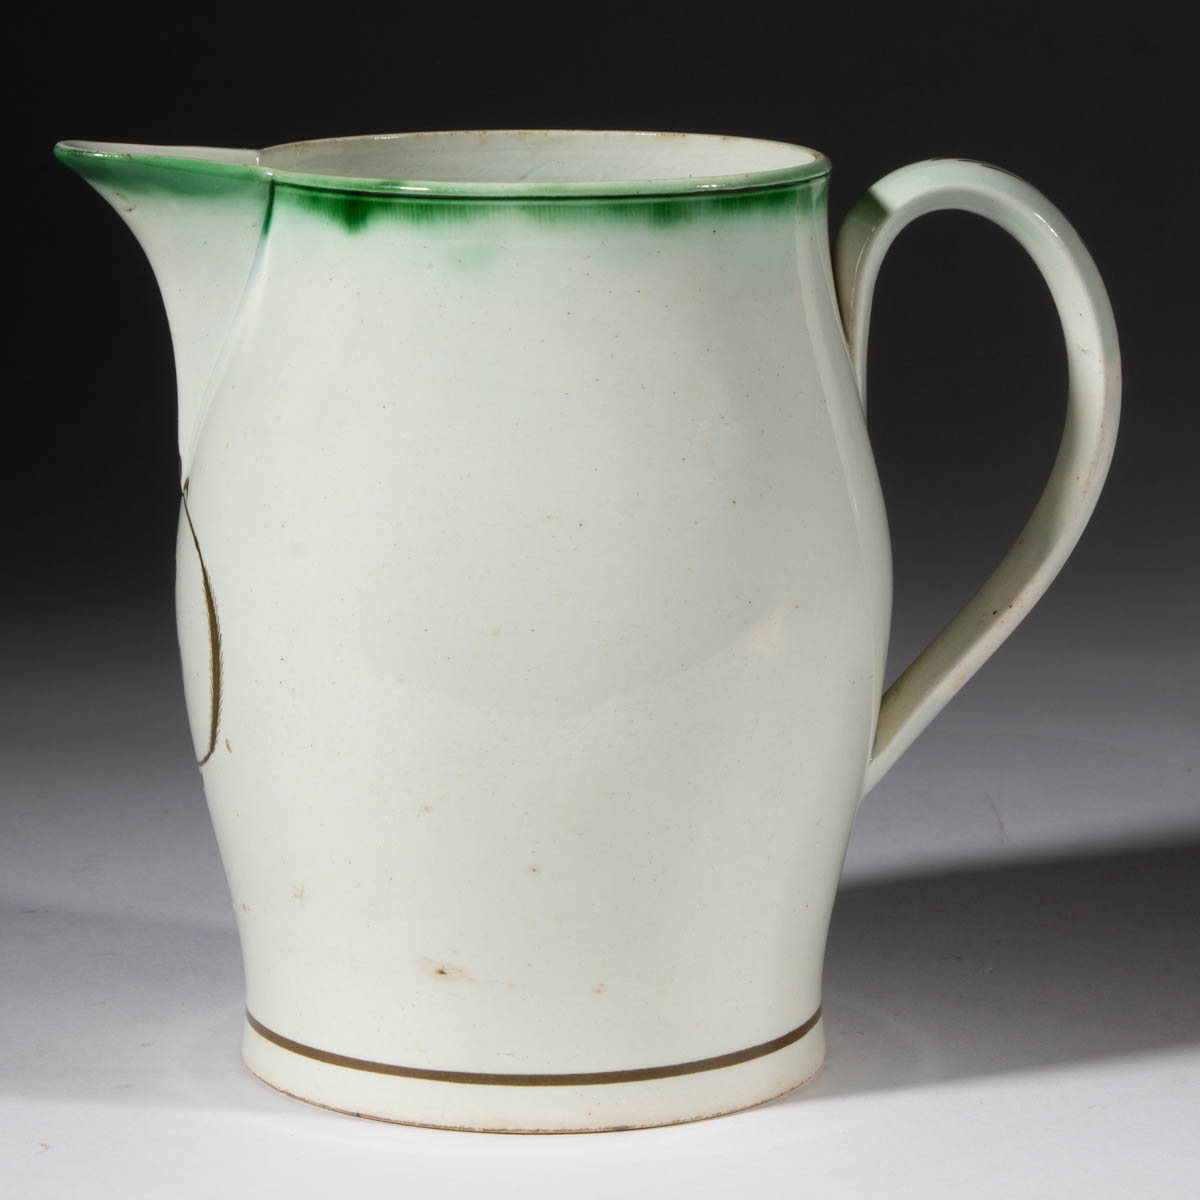 ENGLISH PEARLWARE HAND-PAINTED SHELL EDGE CERAMIC JUG / PITCHER